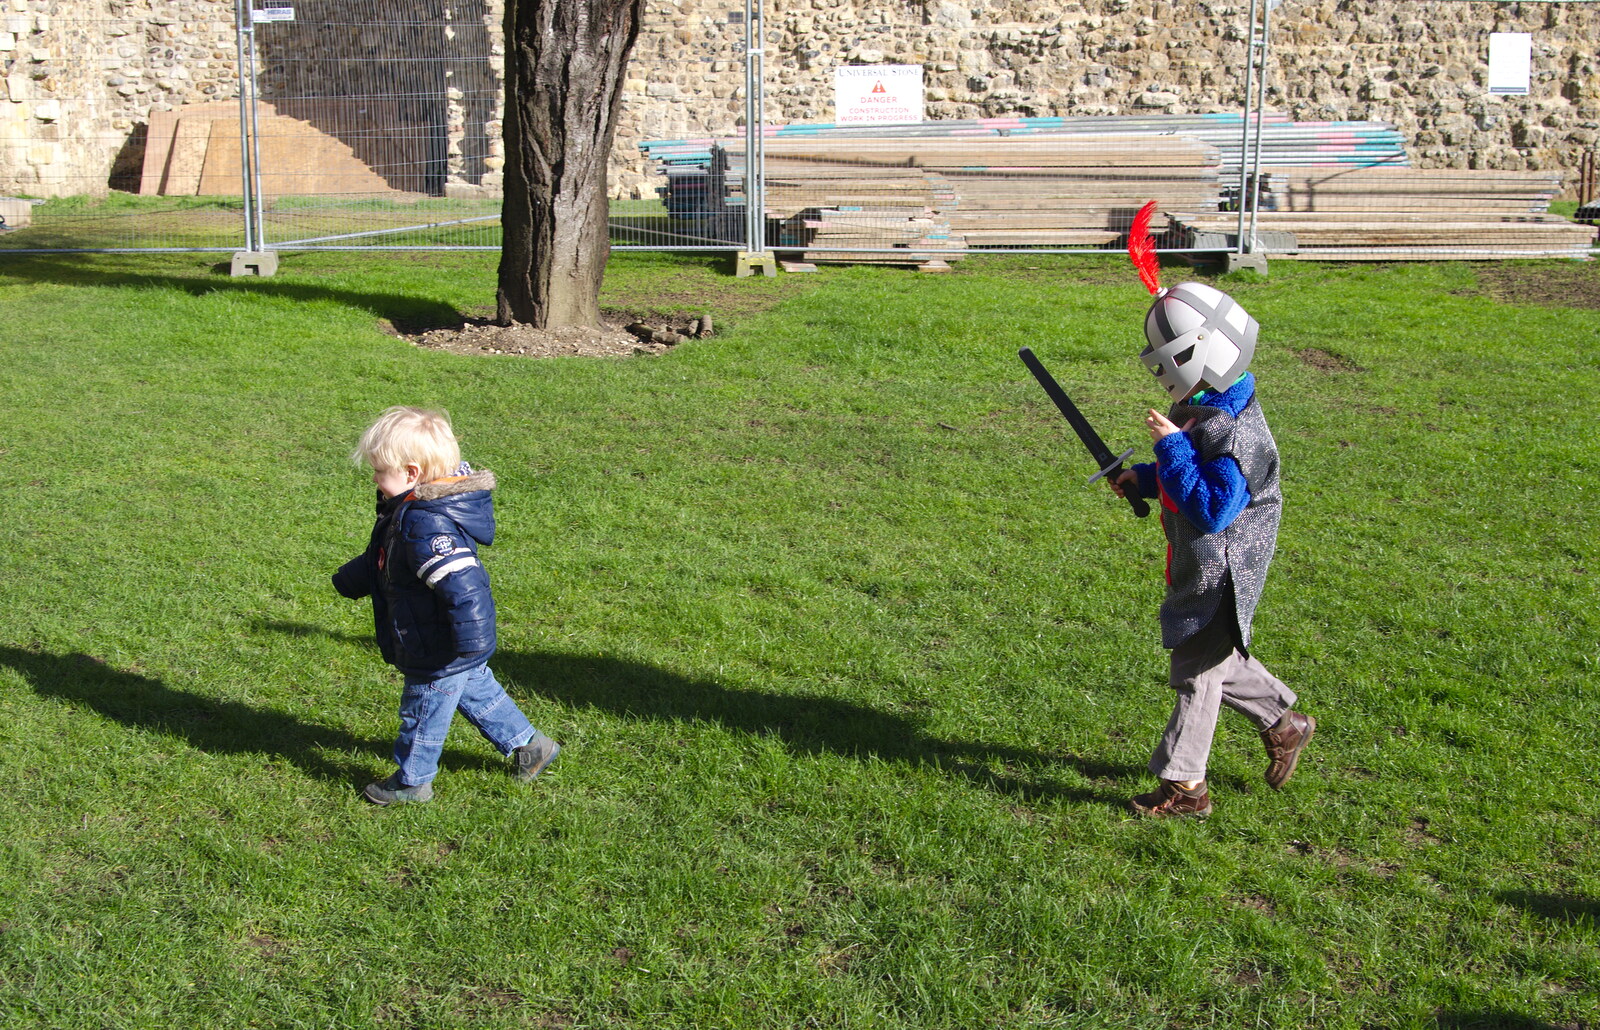 Fred chases Harry around with a sword from A Trip to Framlingham Castle, Framlingham, Suffolk - 16th February 2014